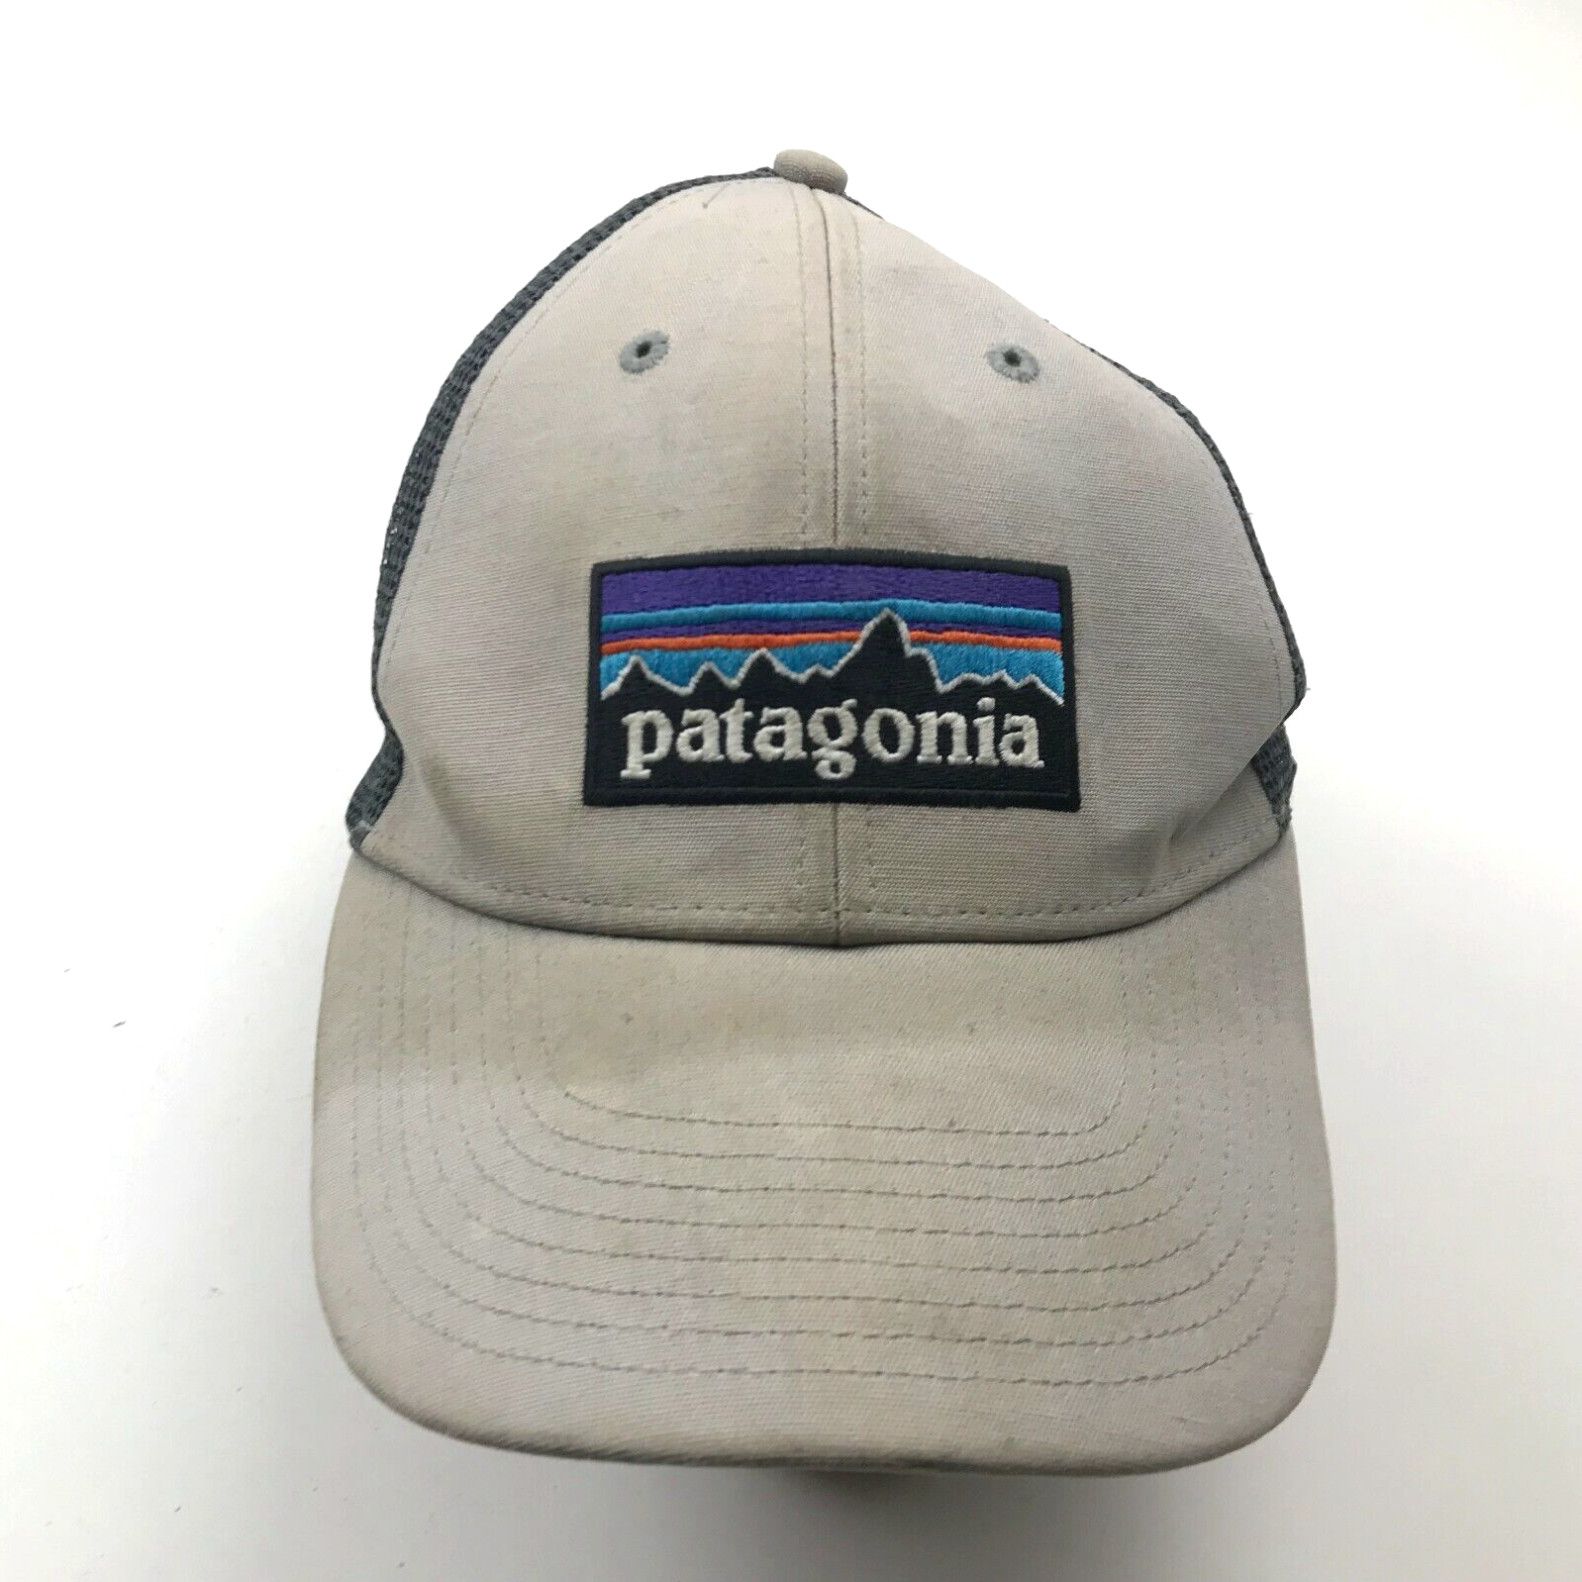 Patagonia Patagonia Live Simply Roger That Snapback Hat Cap Fly Fishing  Green